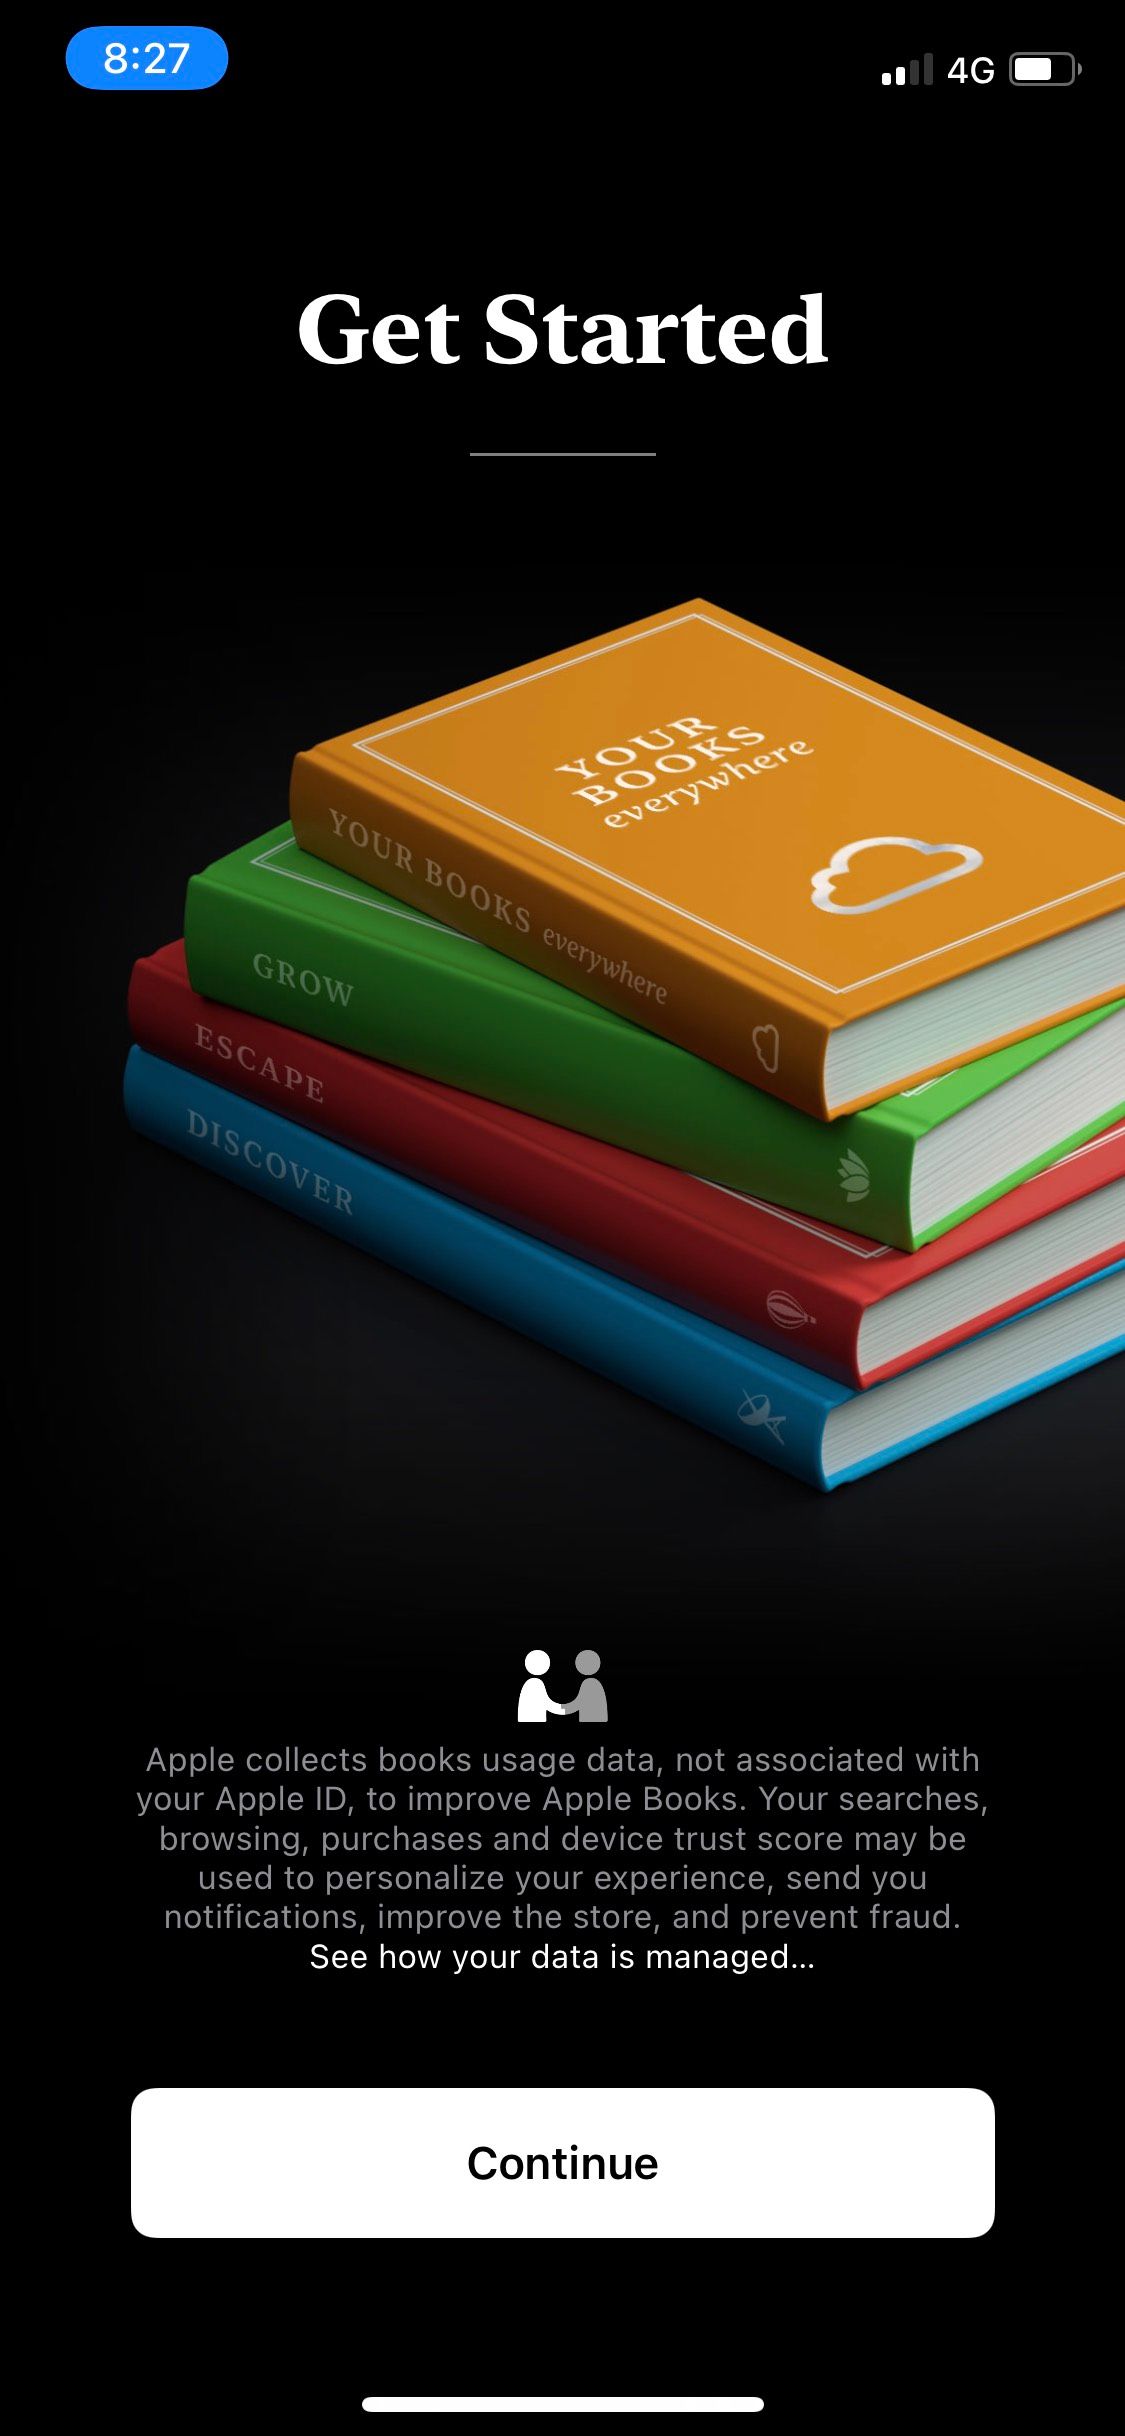 Apple Books get started screen